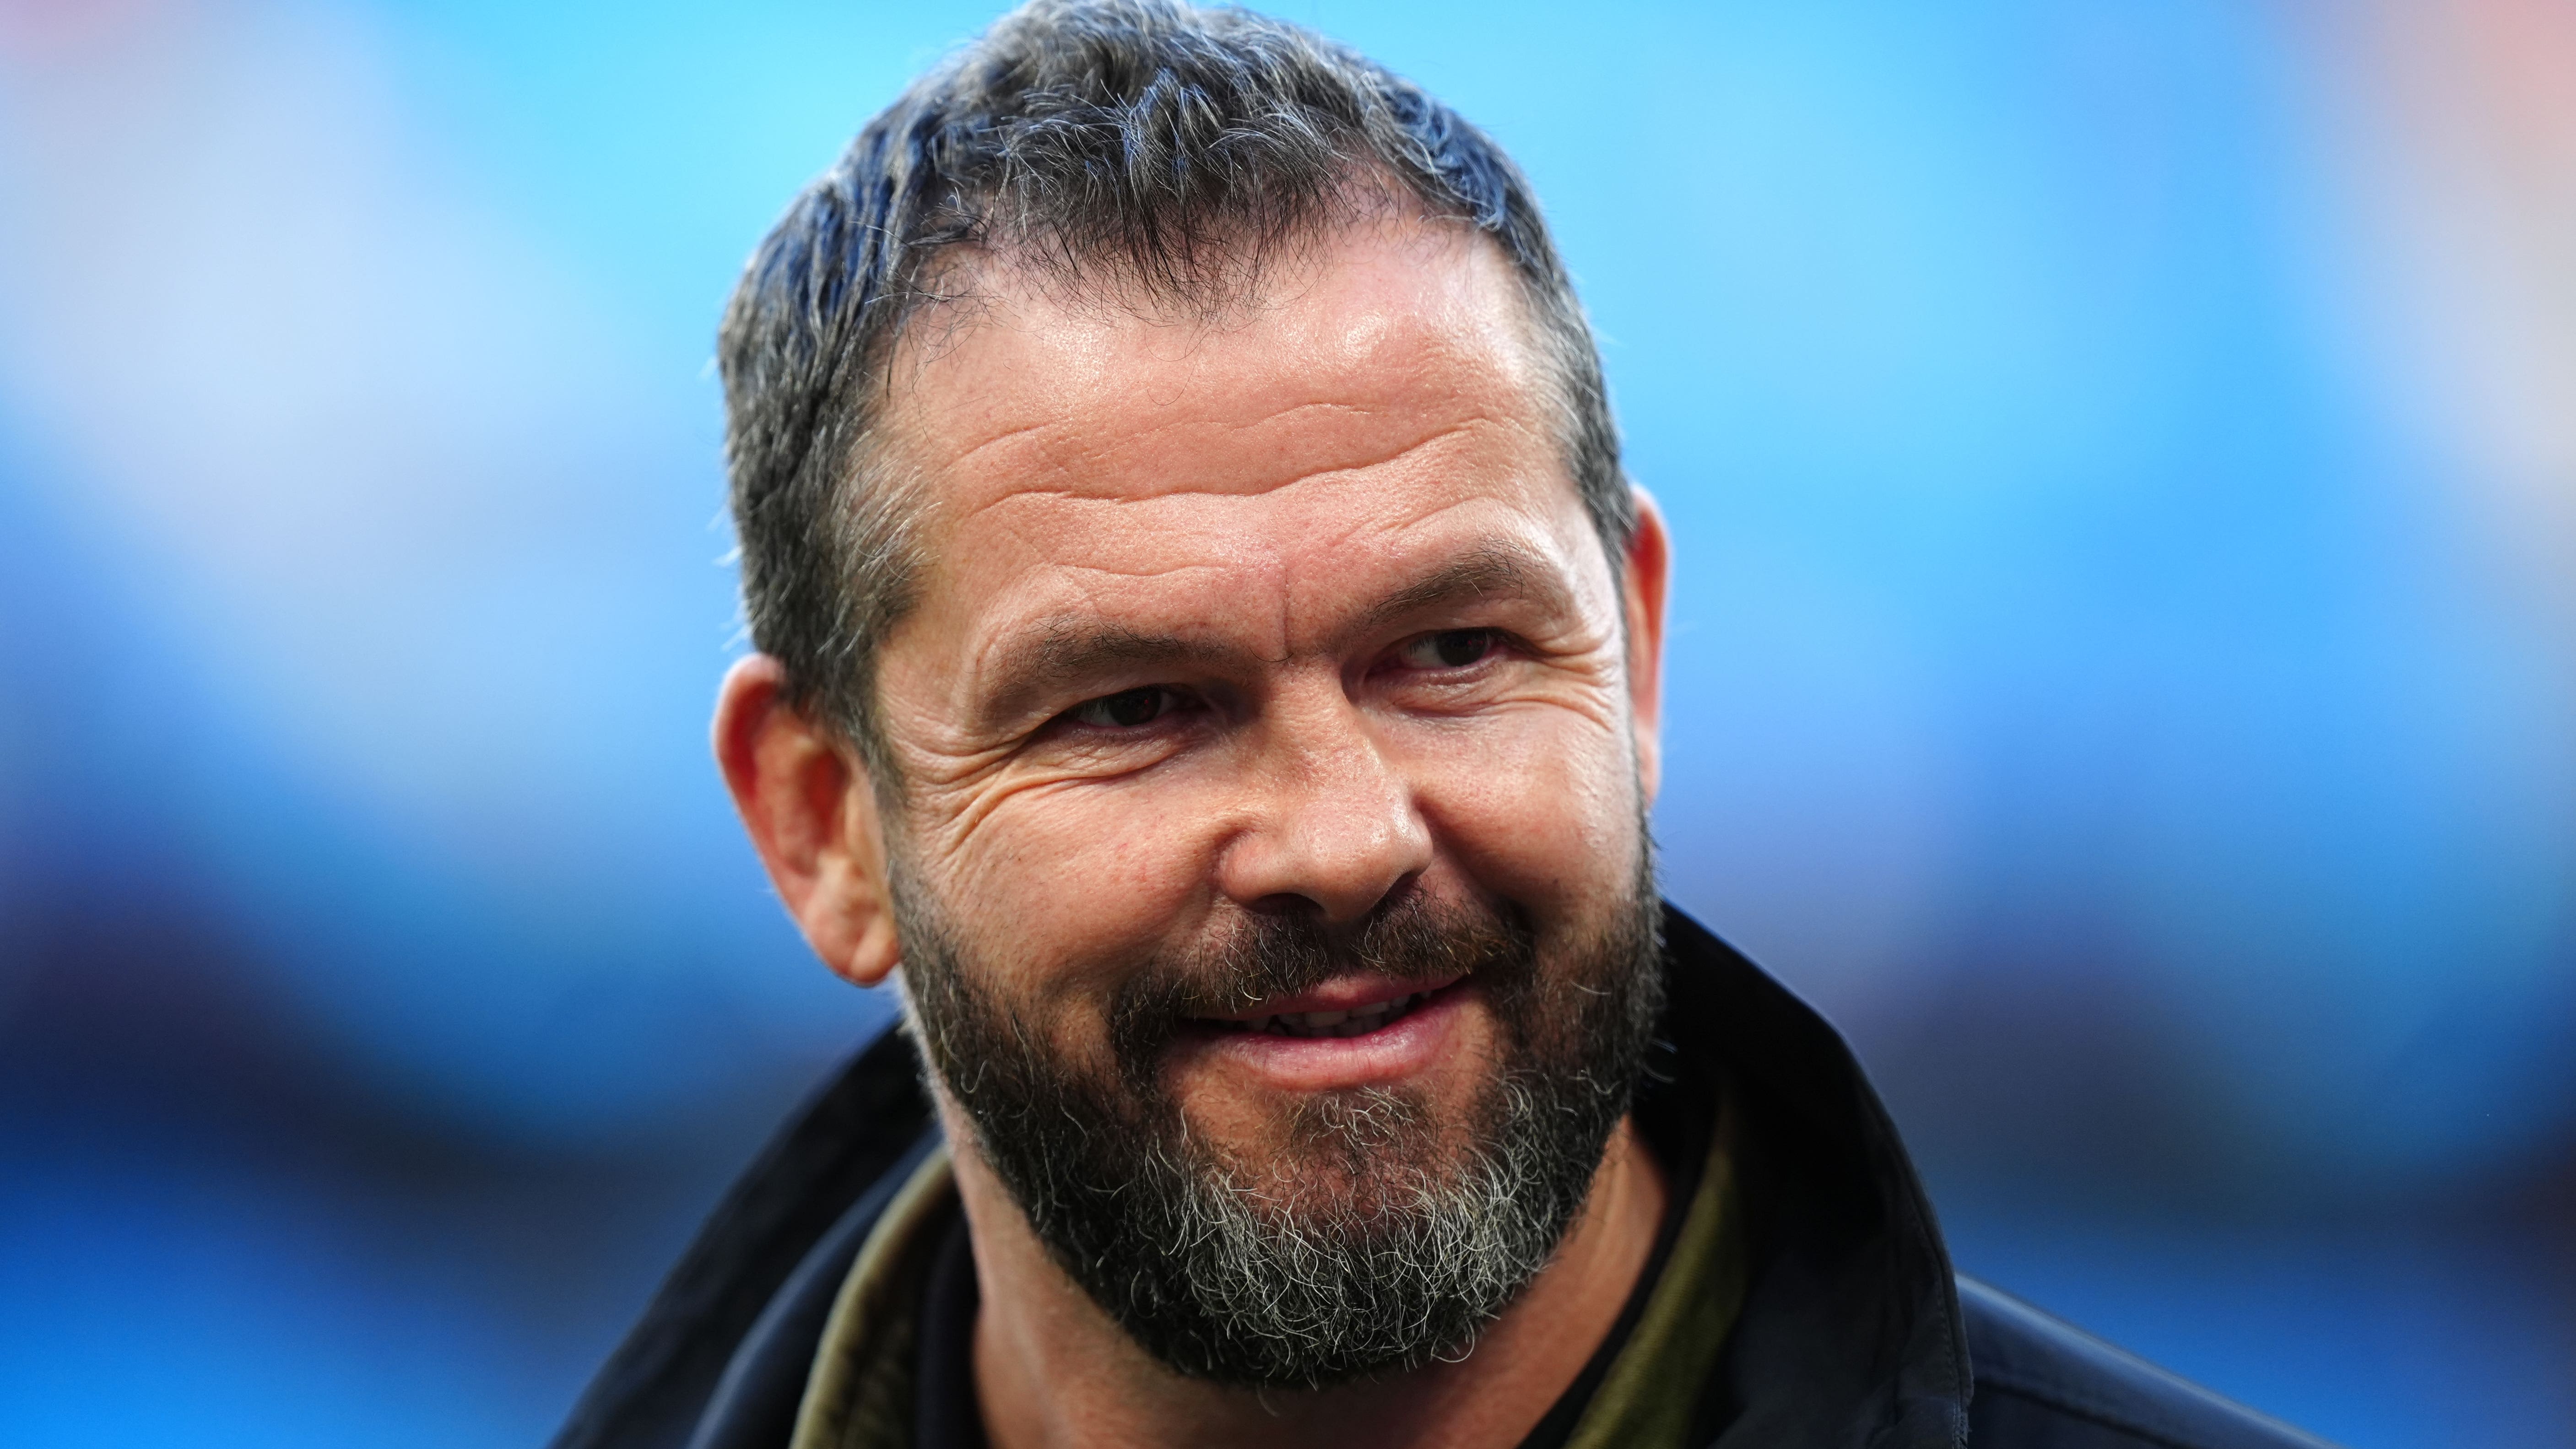 Andy Farrell warns Ireland not to be ‘desperate’ against South Africa